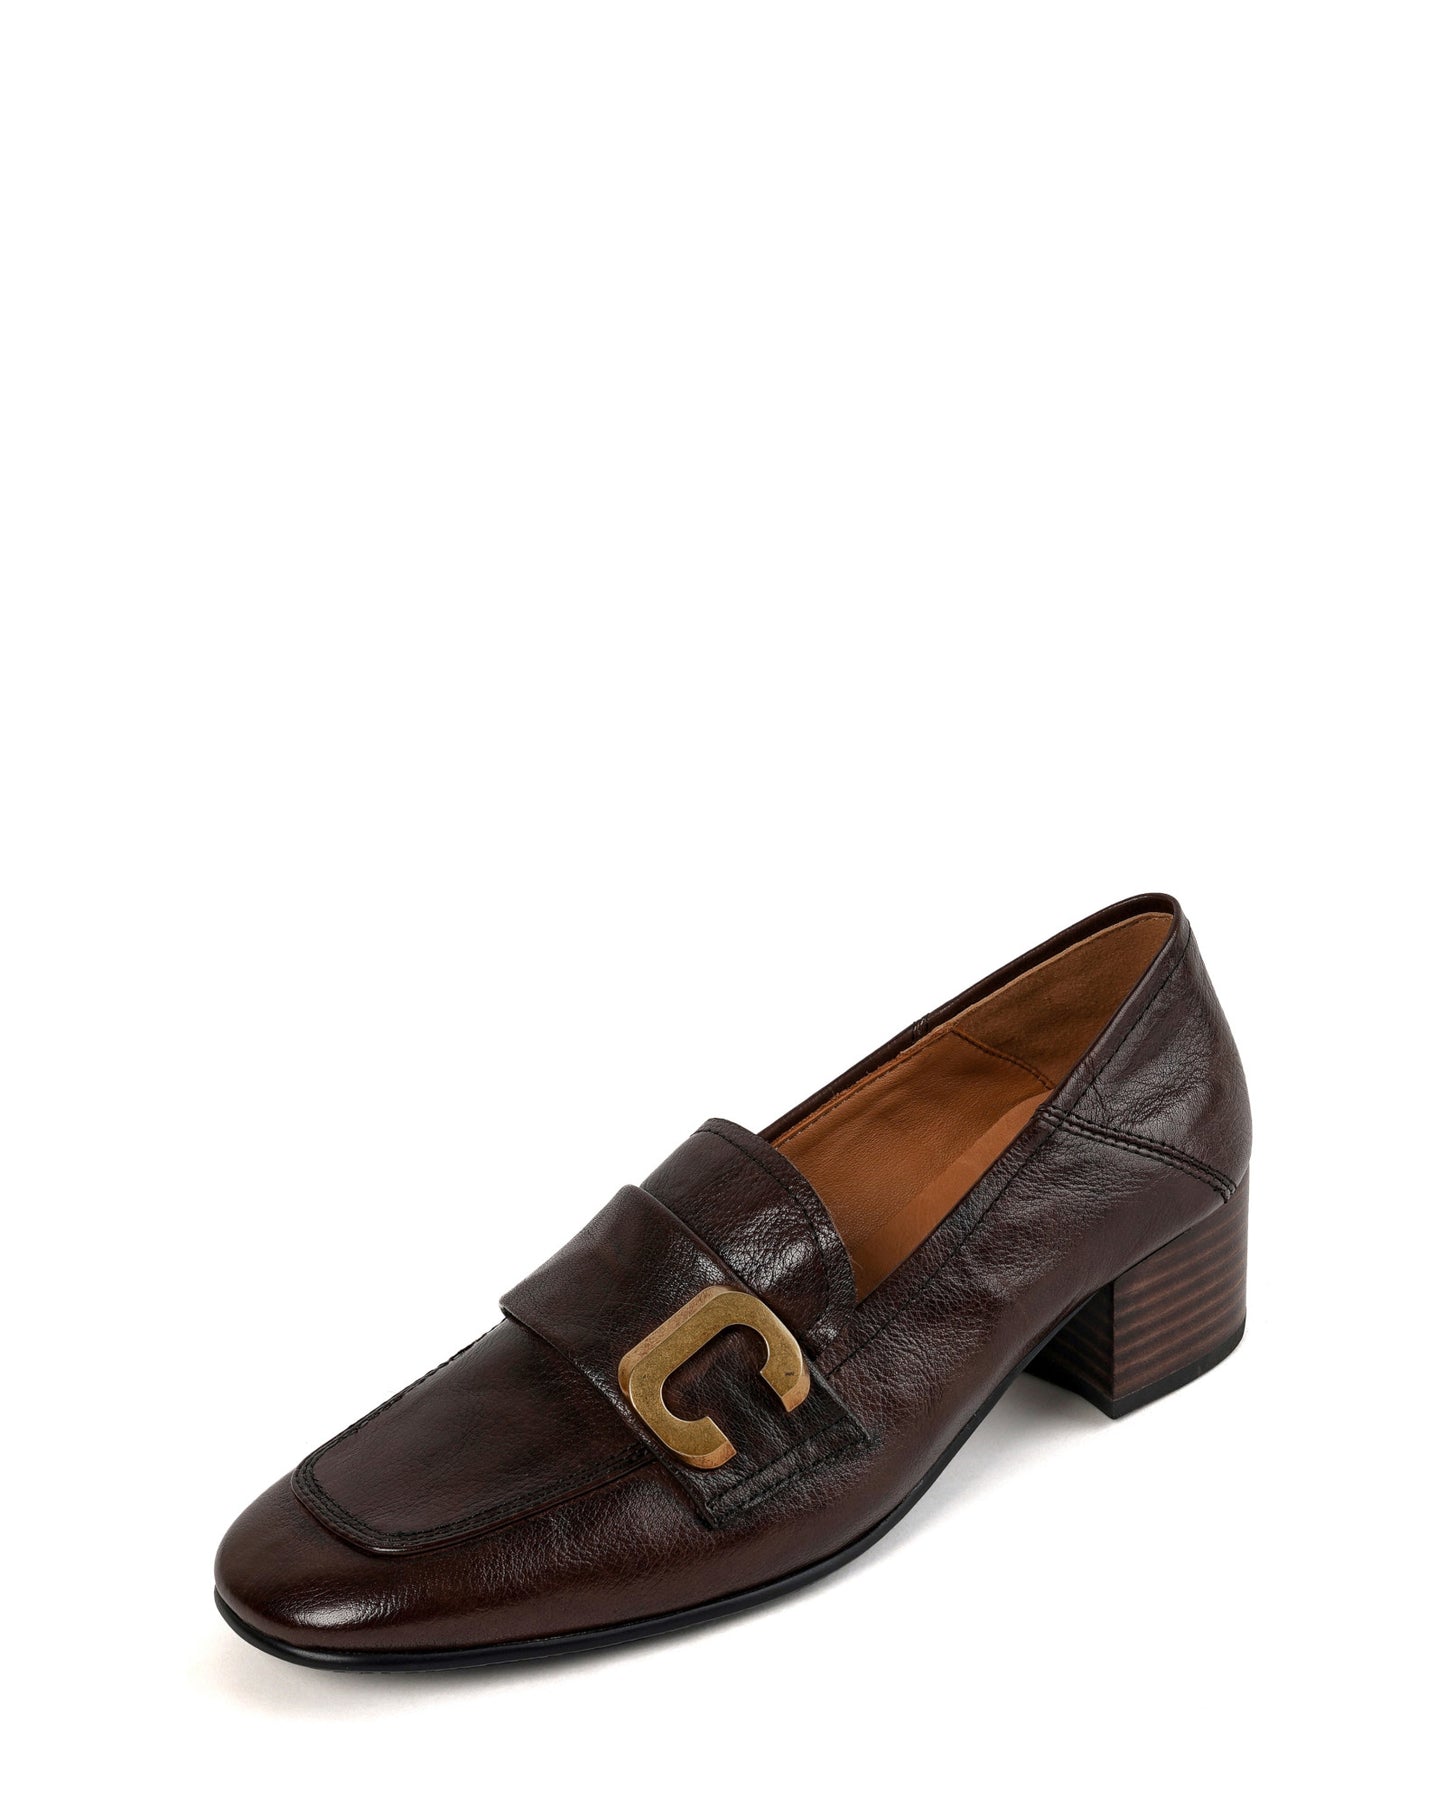 415-c-buckled-leather-loafers-brown